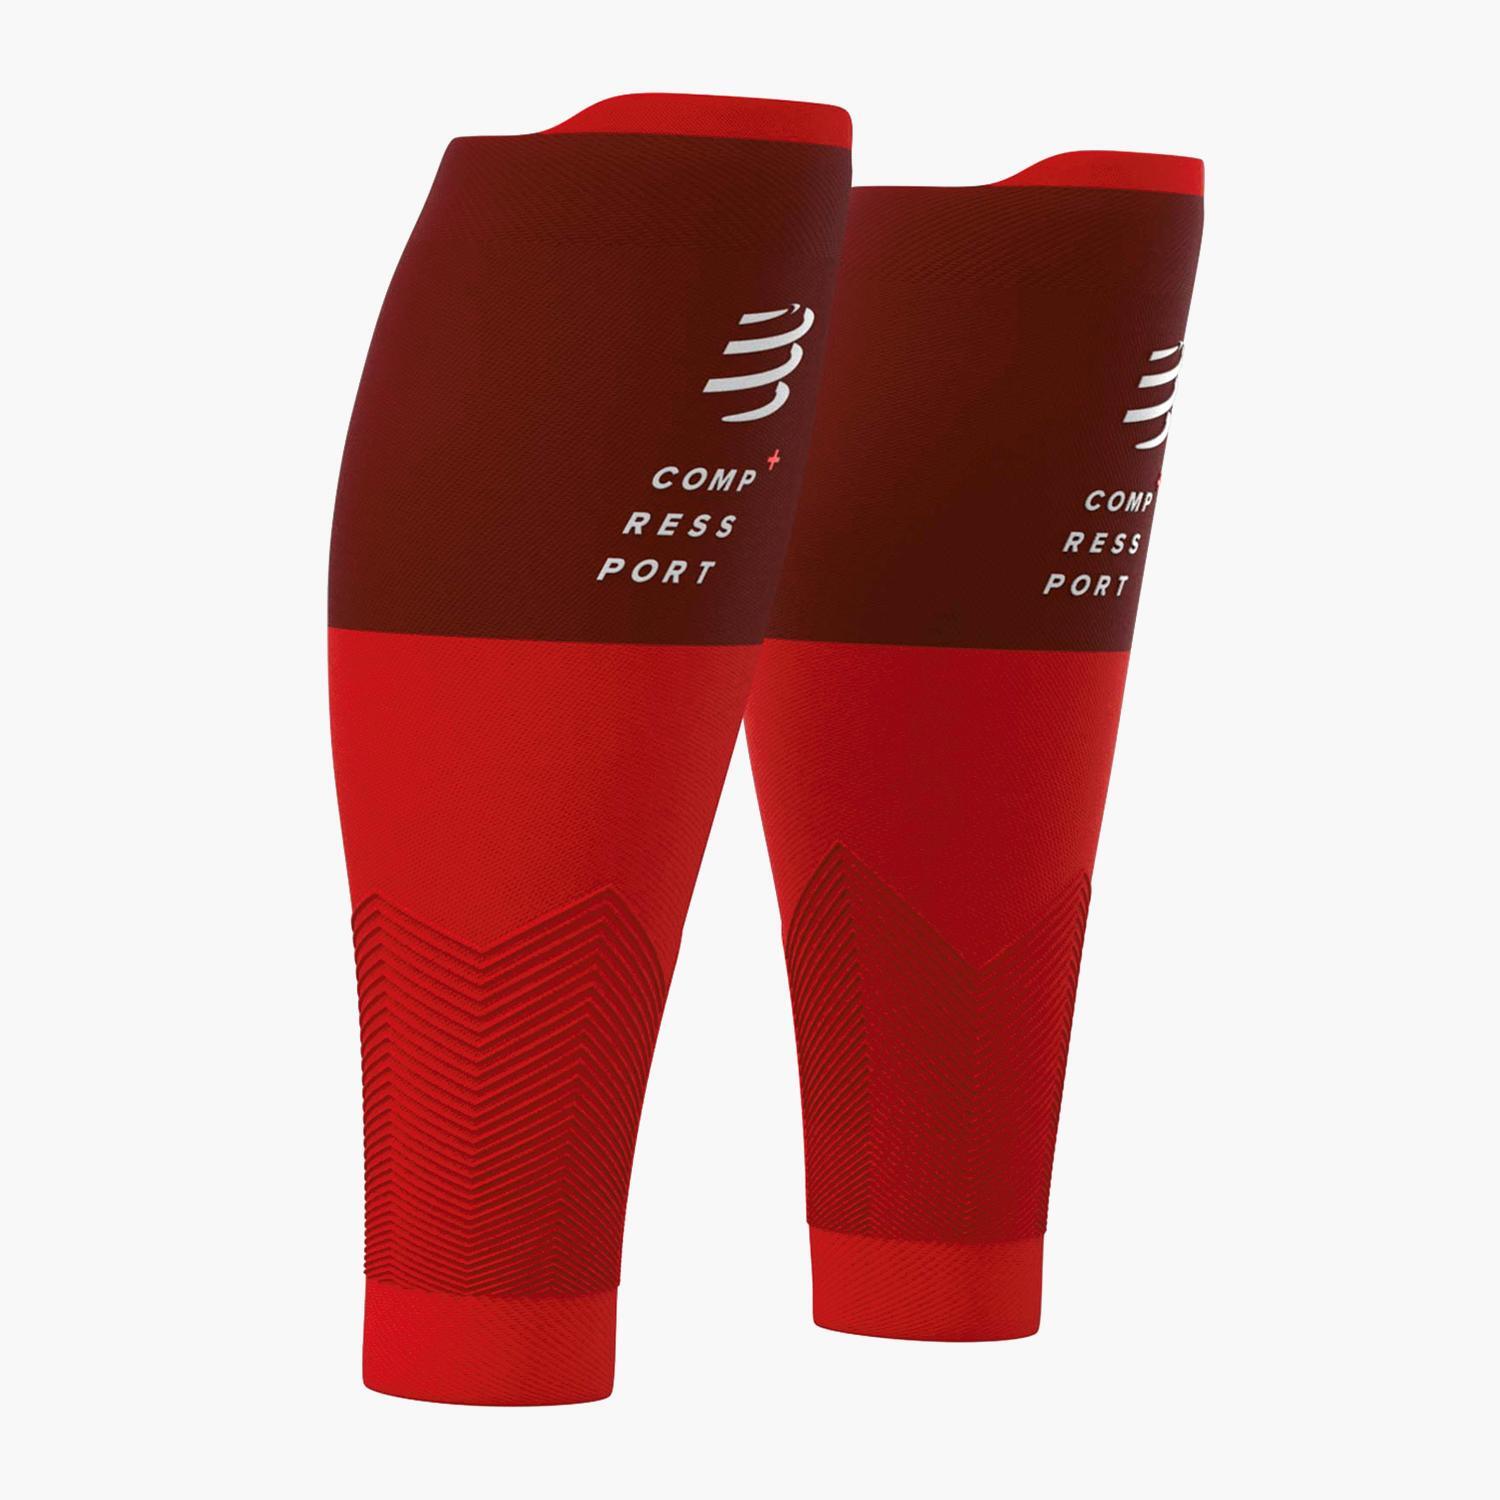 Pernera Compressport - Rouge - Jambière Running sports taille S